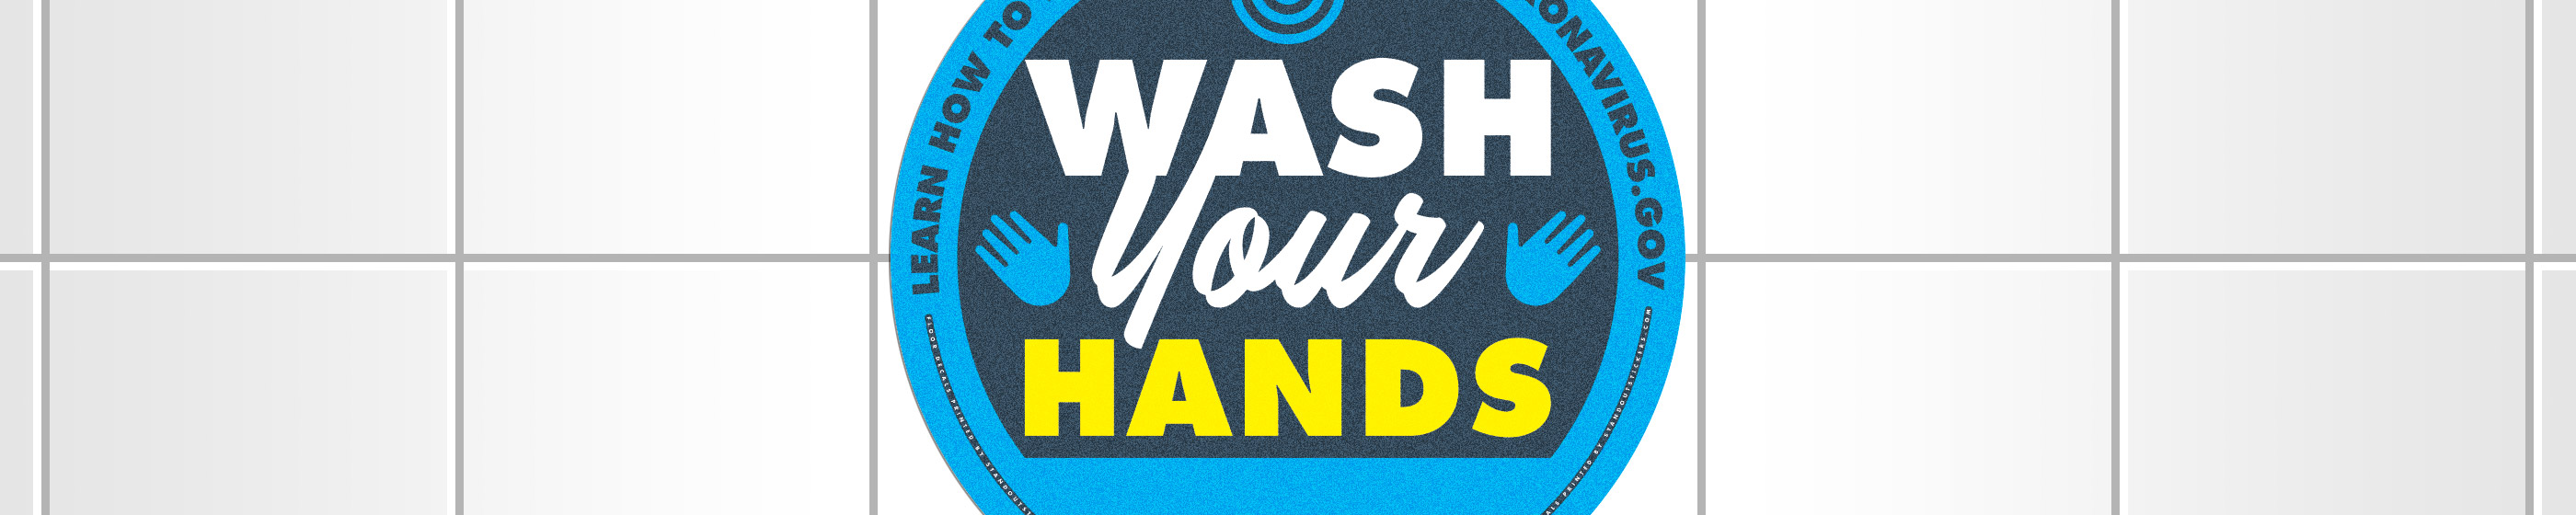 Wash Your Hands Floor Decal Cover Image